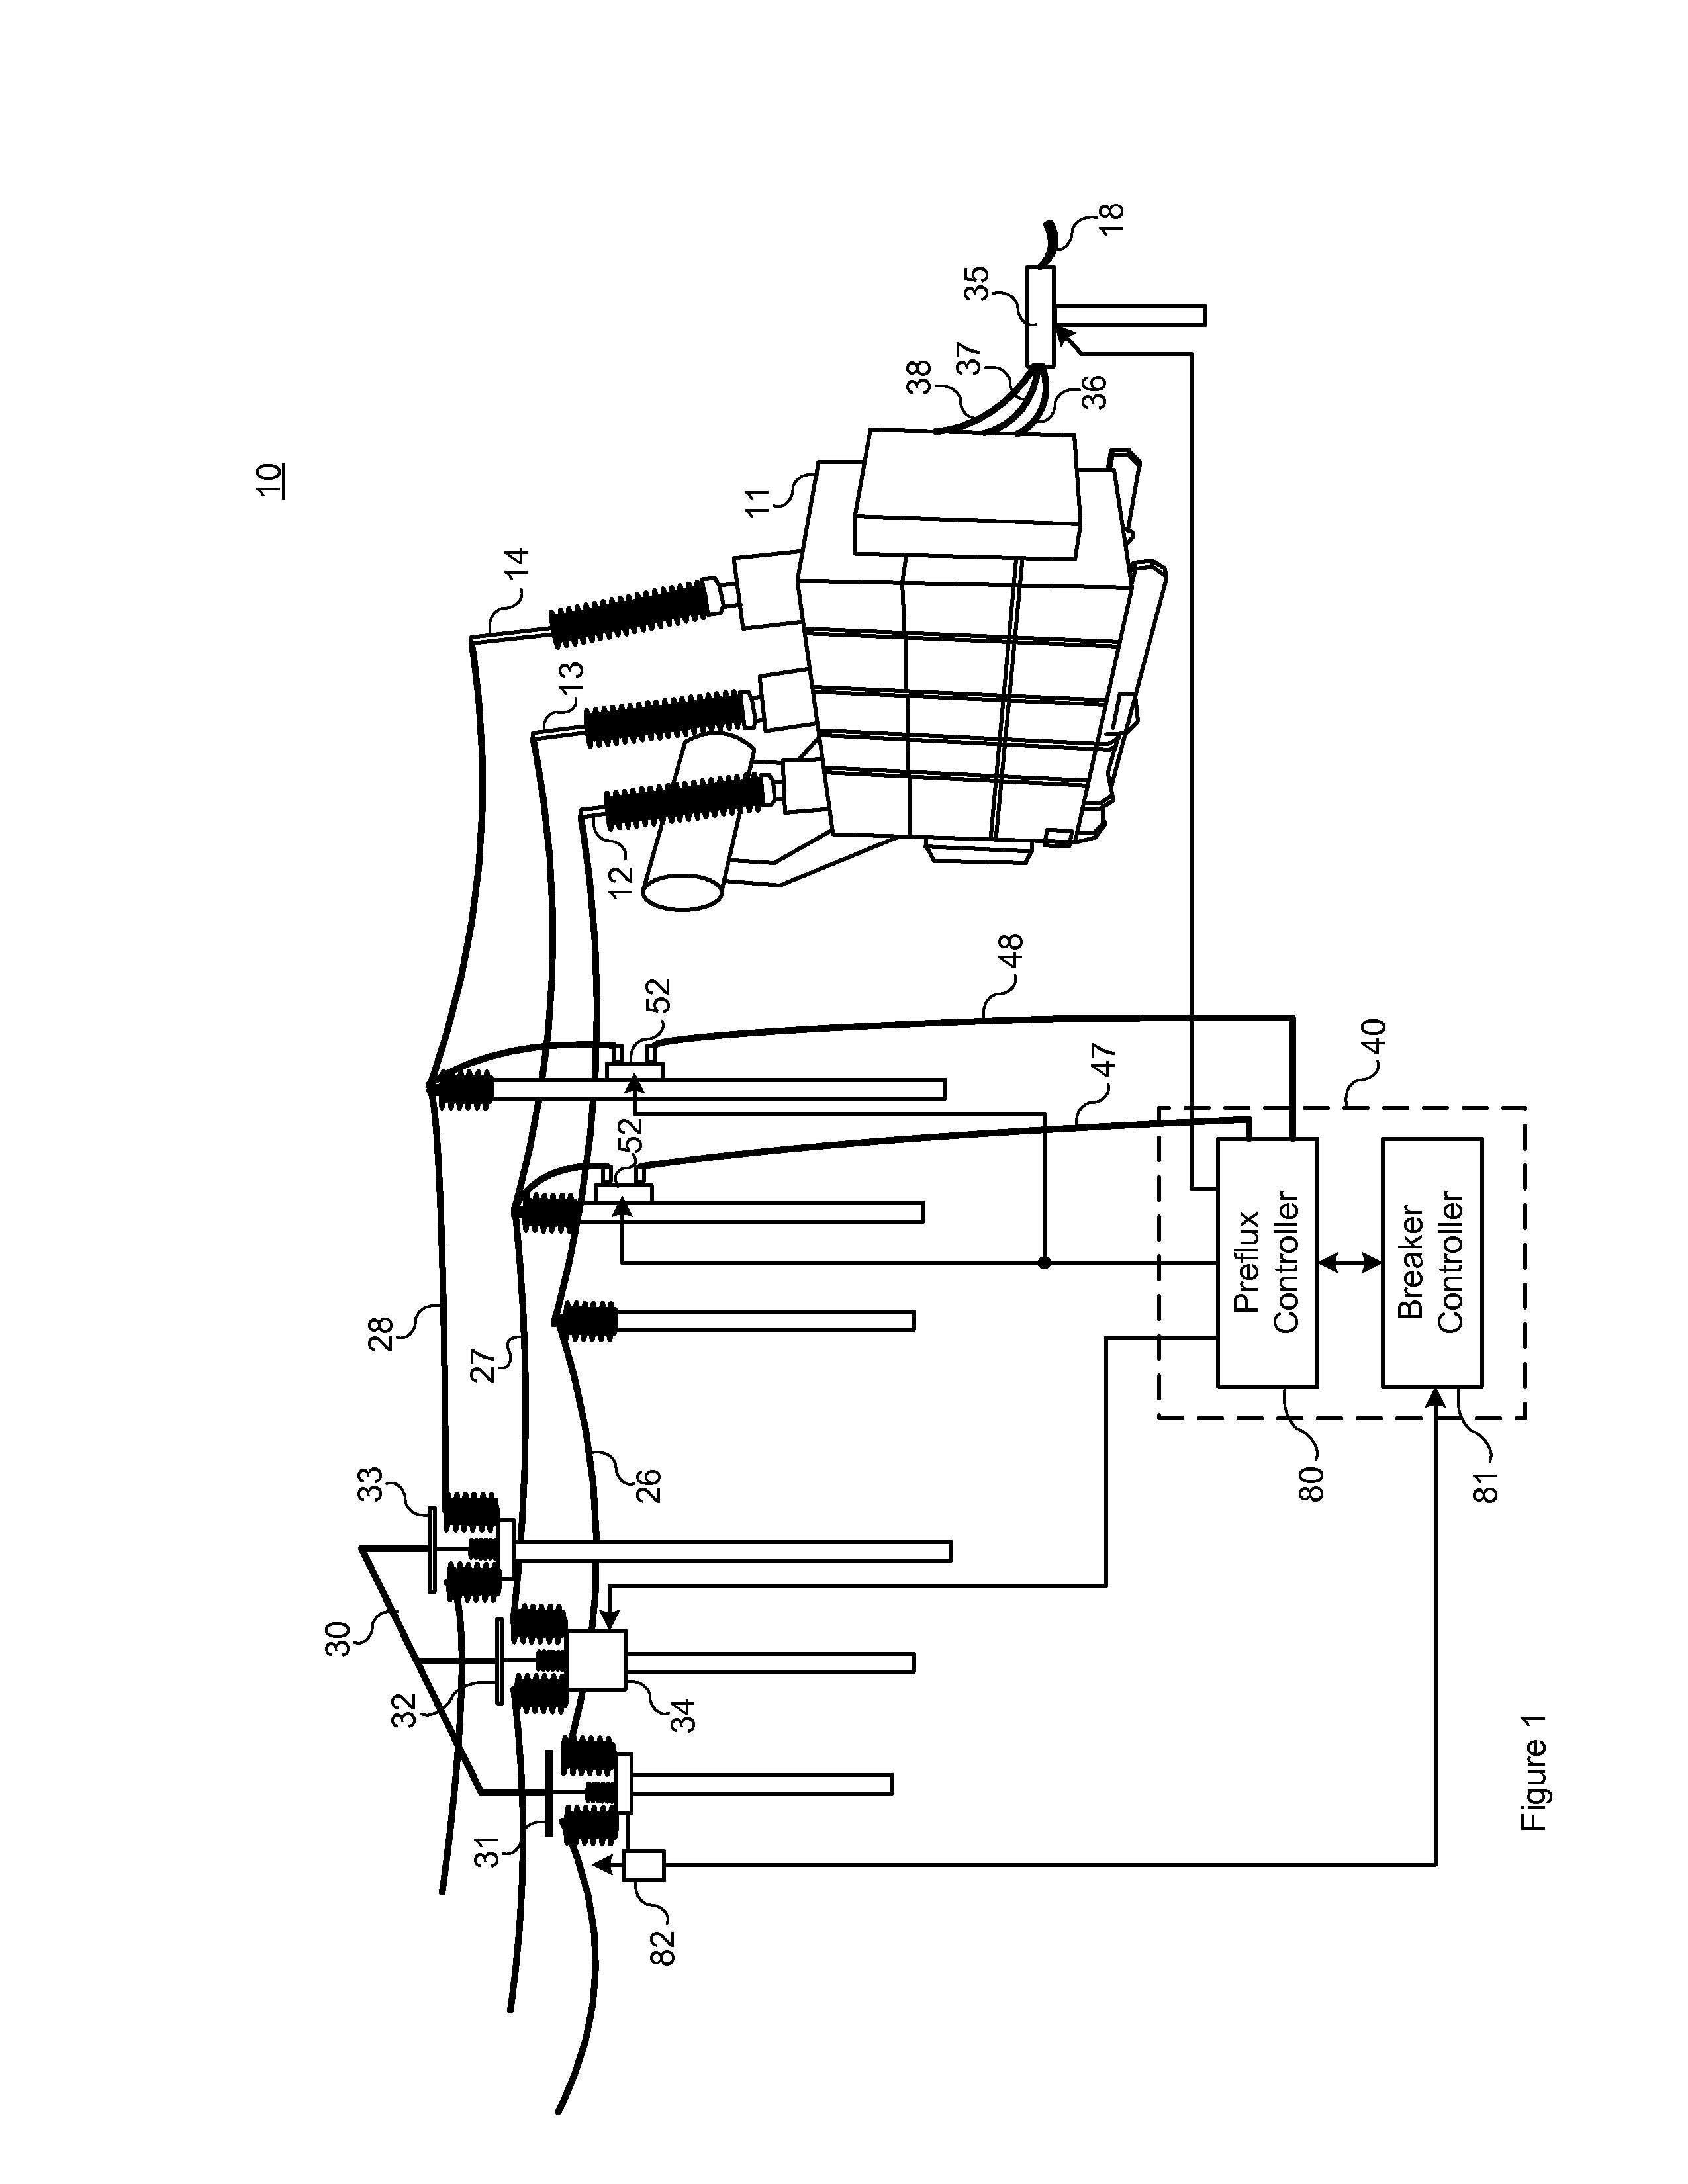 System, Apparatus, and Method for Reducing Inrush Current in a Three-Phase Transformer